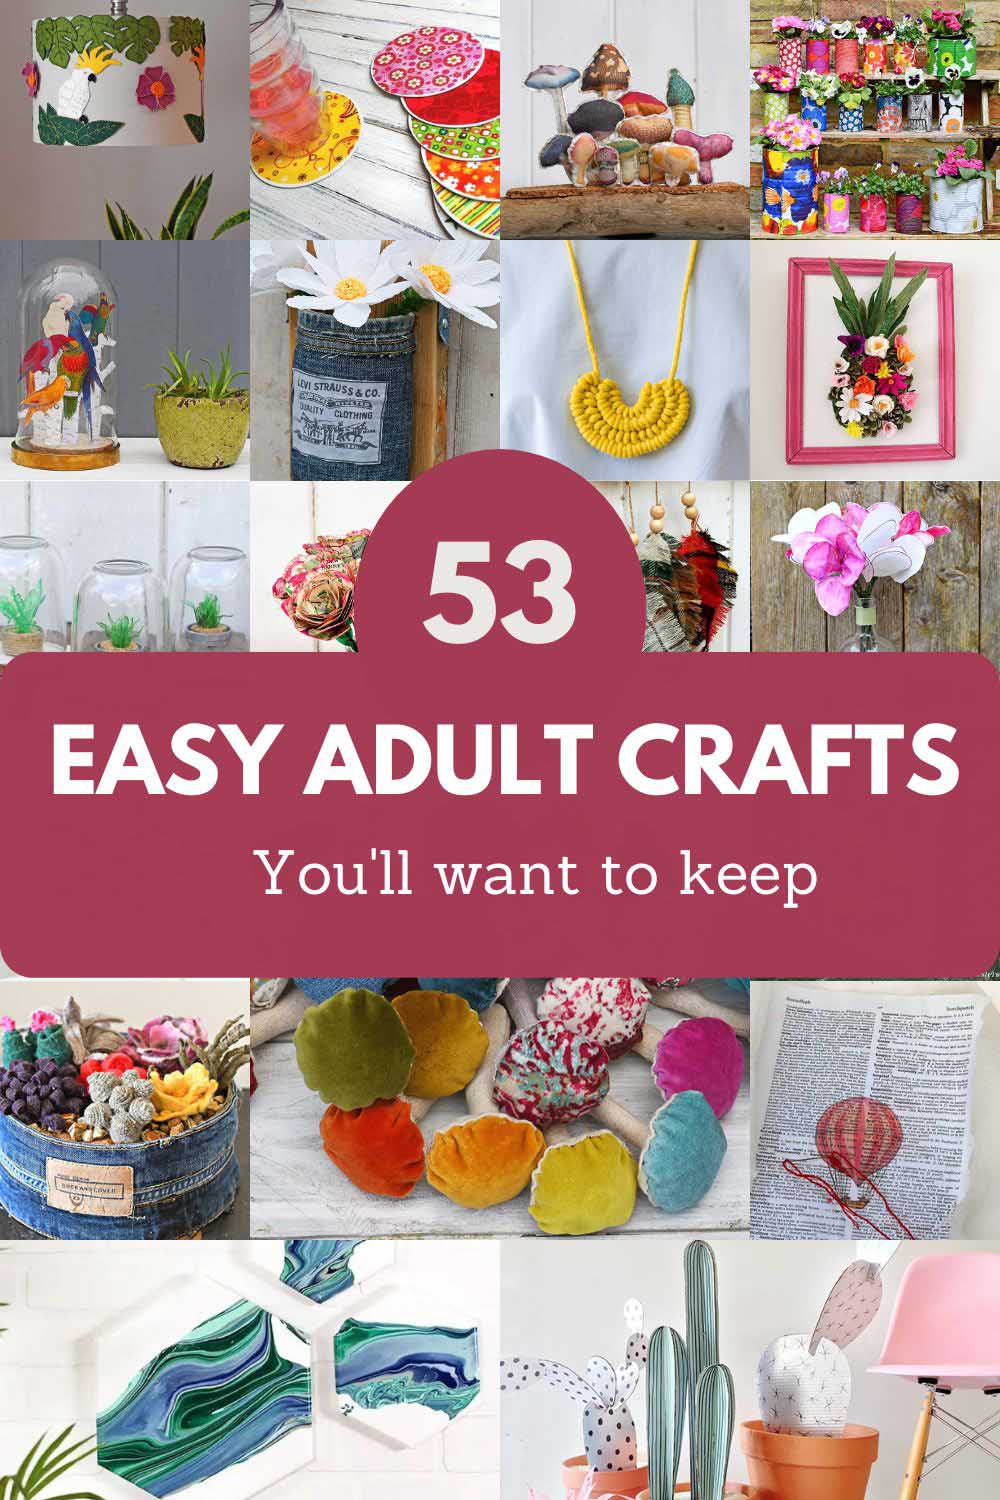 54 Awesome Adult Craft Ideas That You'll Want To Make And Keep